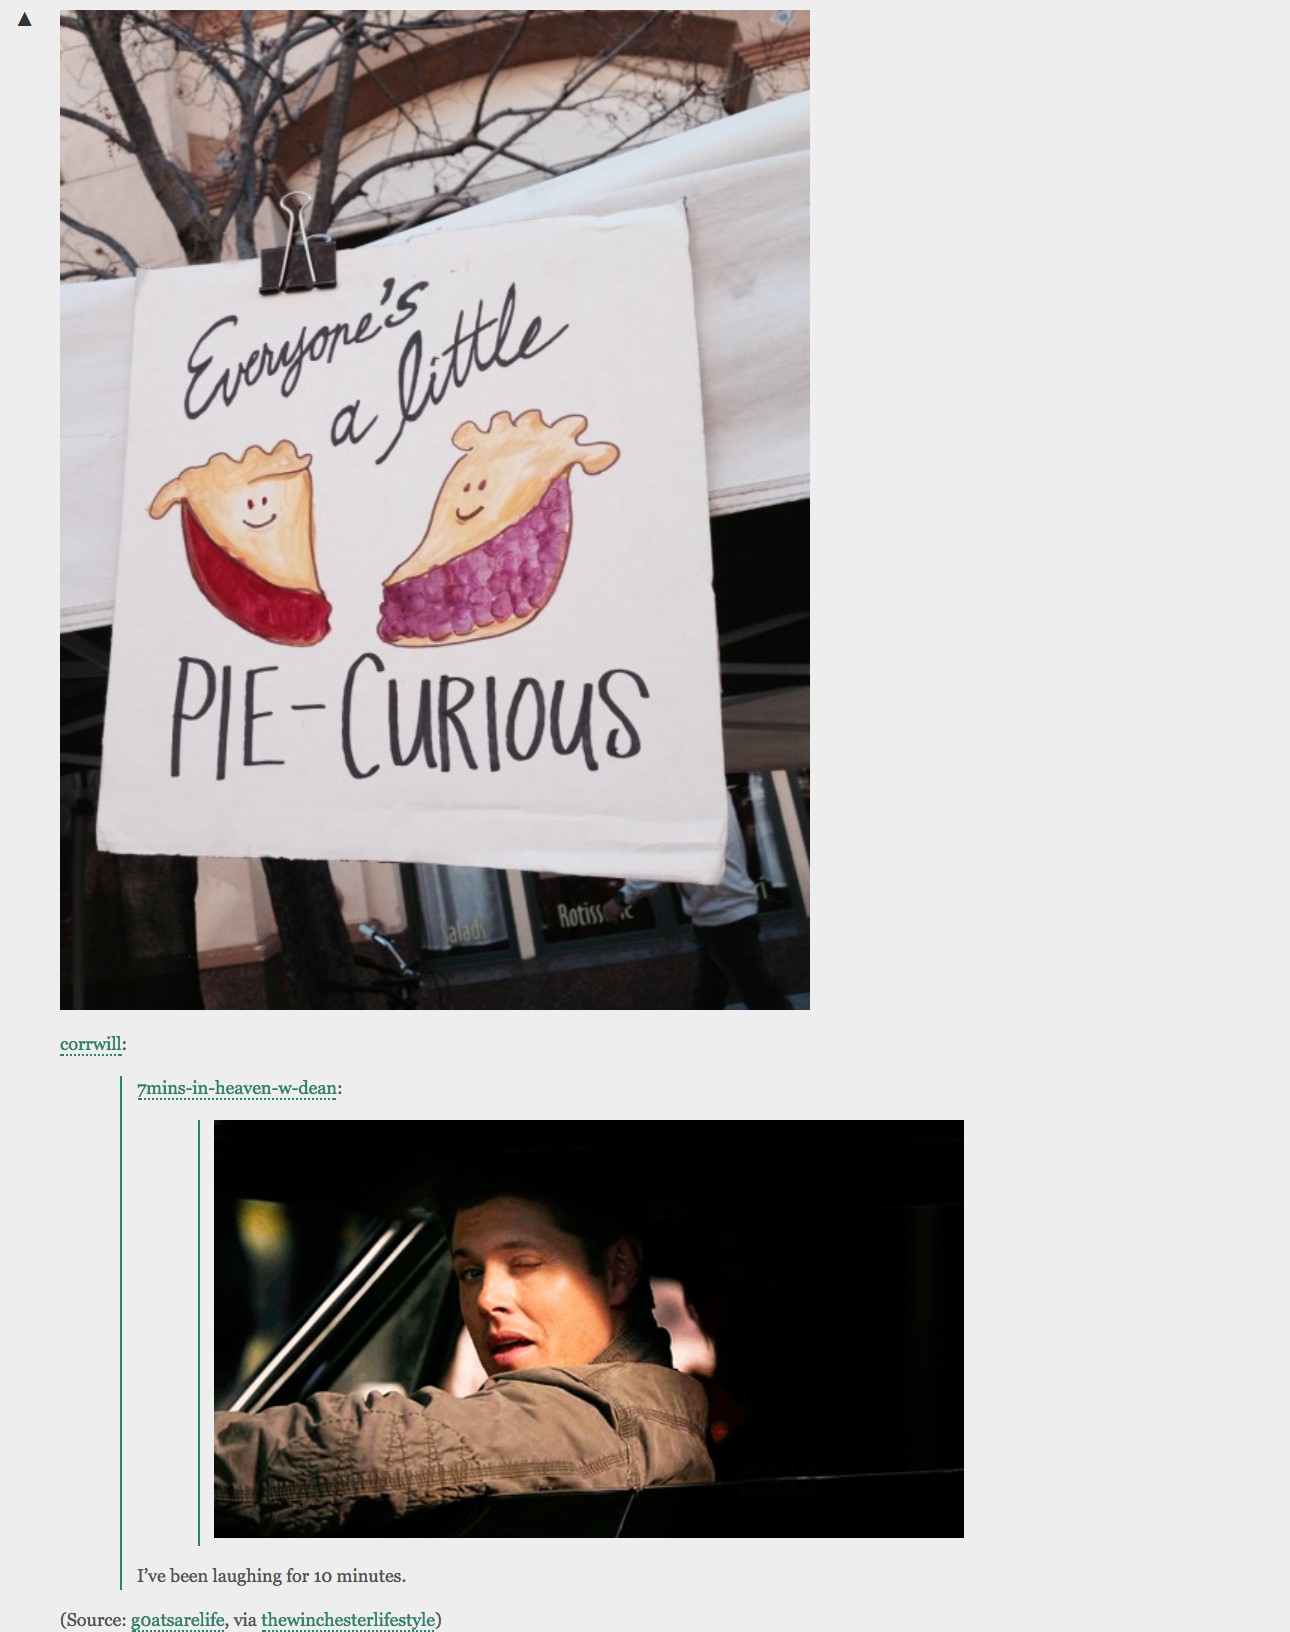 The first image is a sign of two slices of pie. They are drawn in a cartoon style with smiley faces on the crust. The text on the sign reads, 'Everyone's a little pie-curious.' Beneath the sign is a GIF of Ackles as Dean sitting in the Impala. The window is rolled down and he is winking. Below the GIF is the text 'I've been laughing for 10 minutes.'